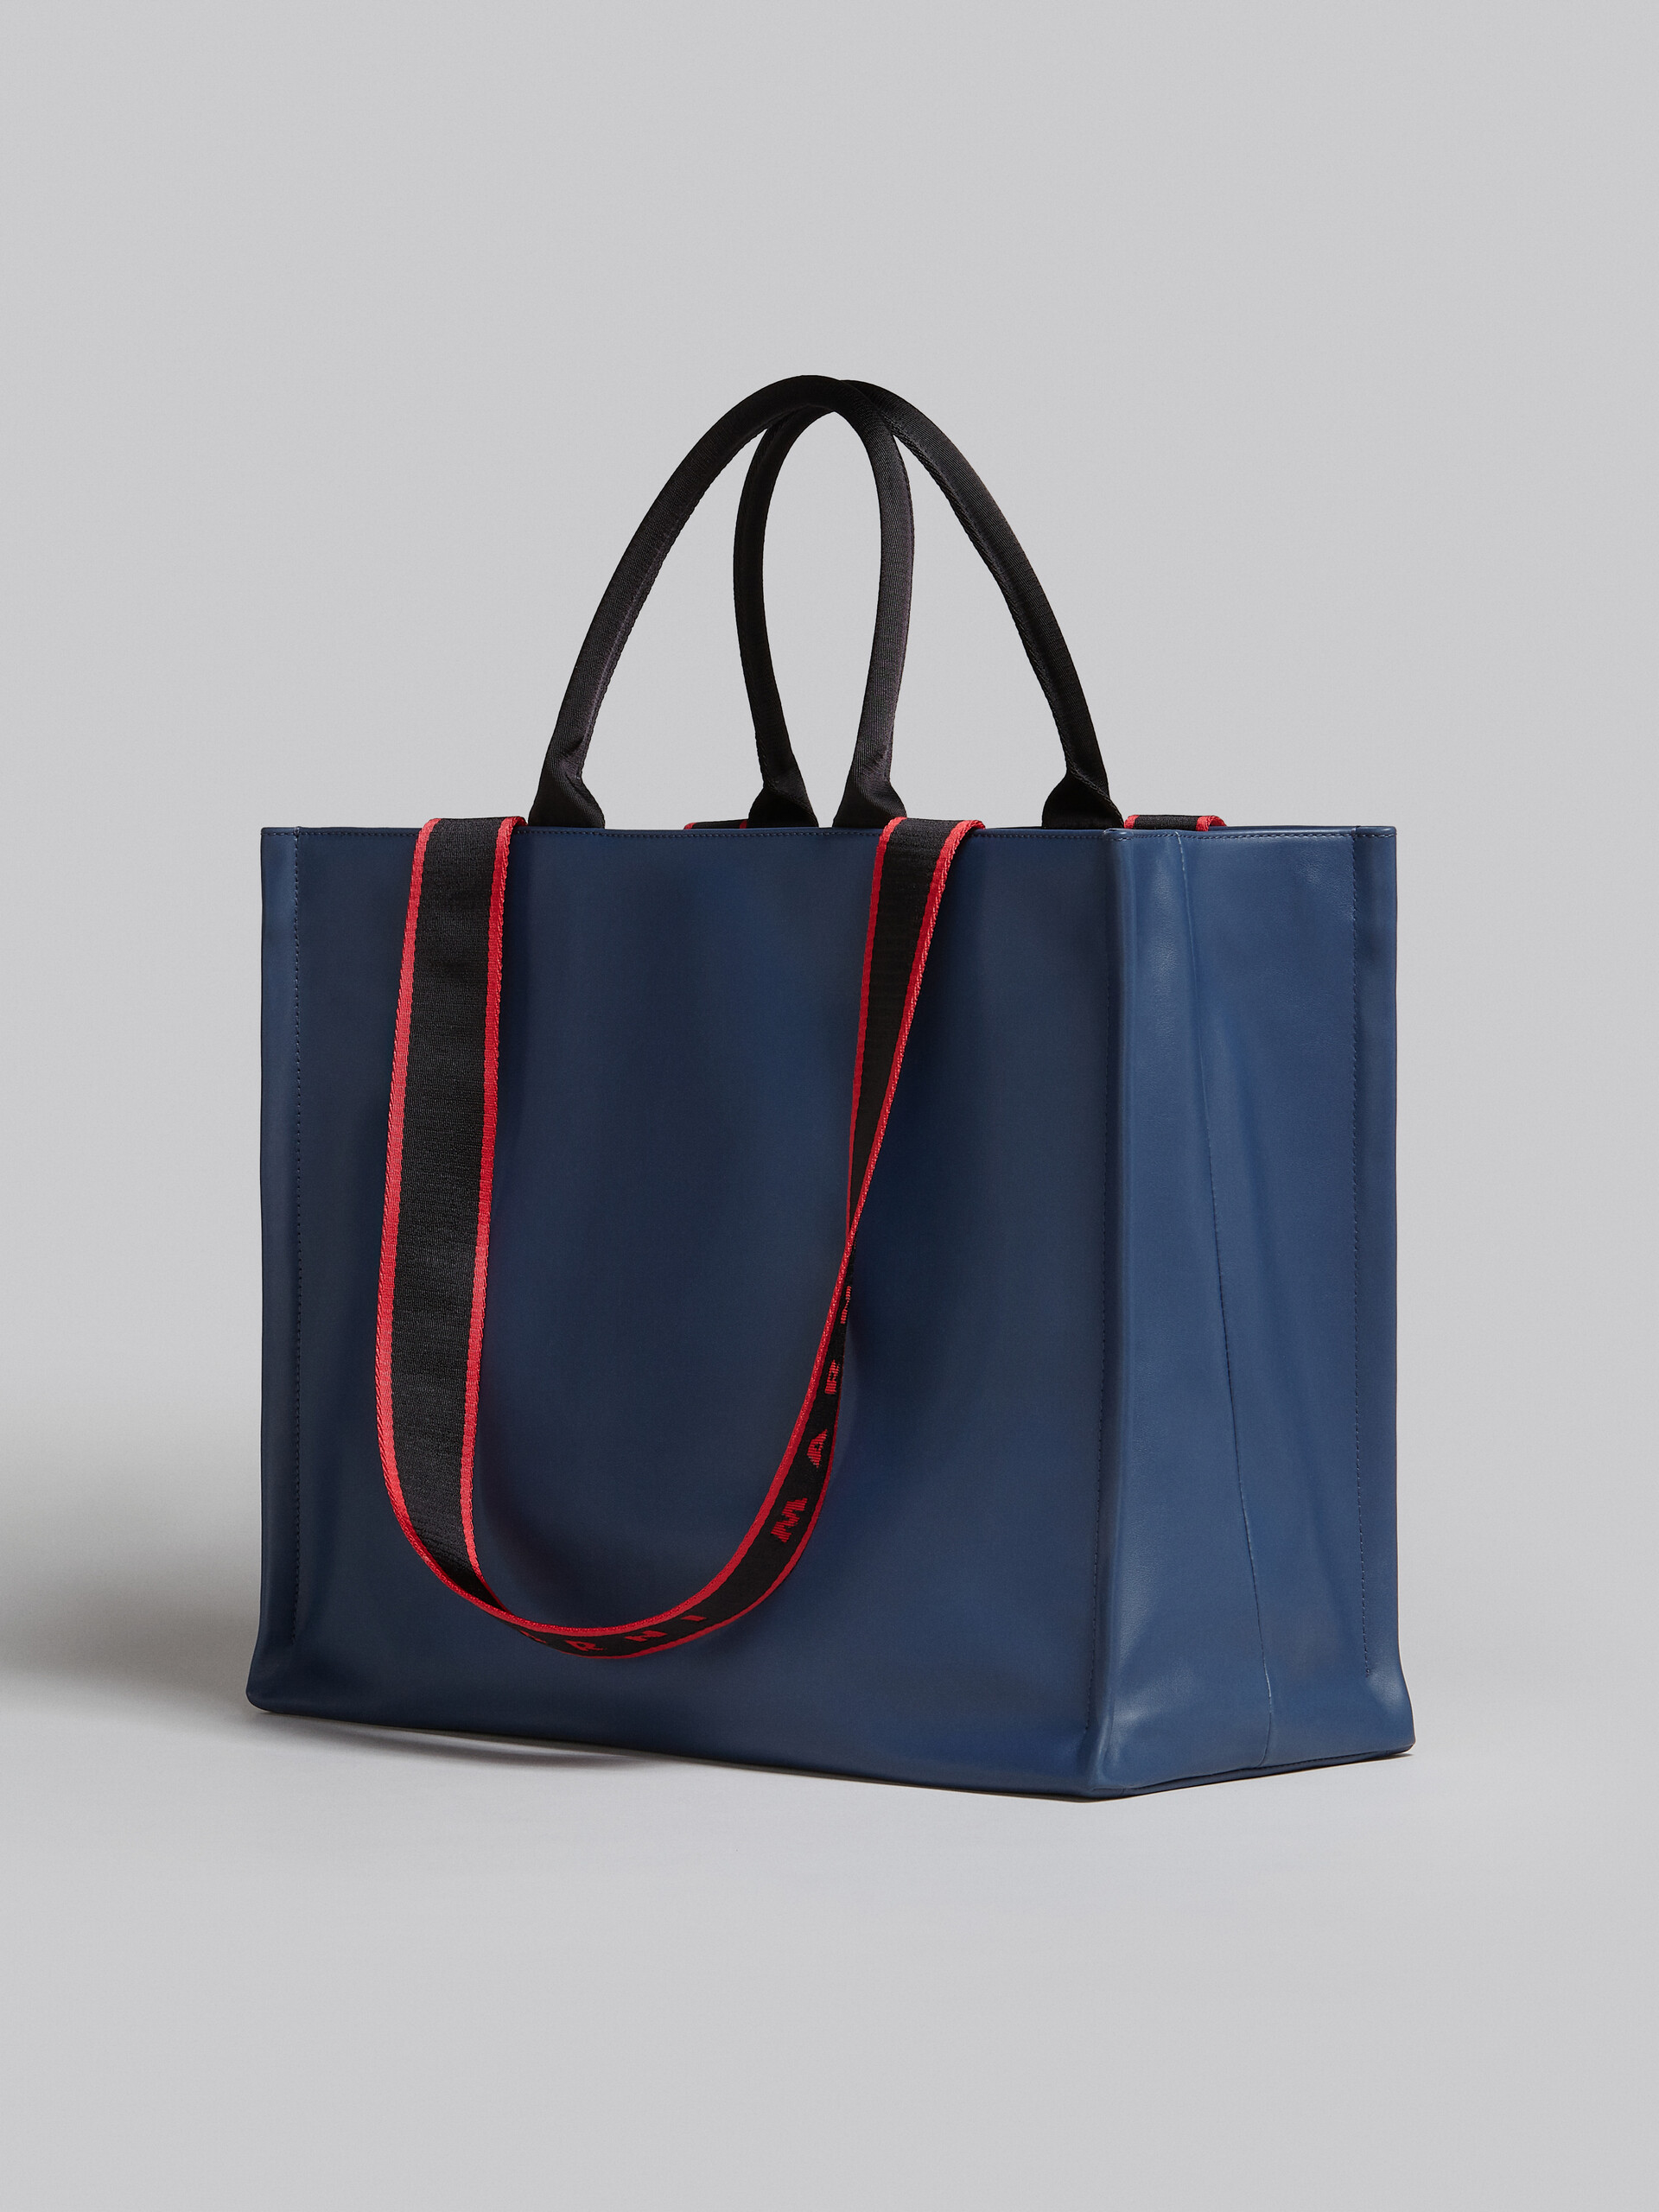 Bey Tote Bag in blue leather - Shopping Bags - Image 3